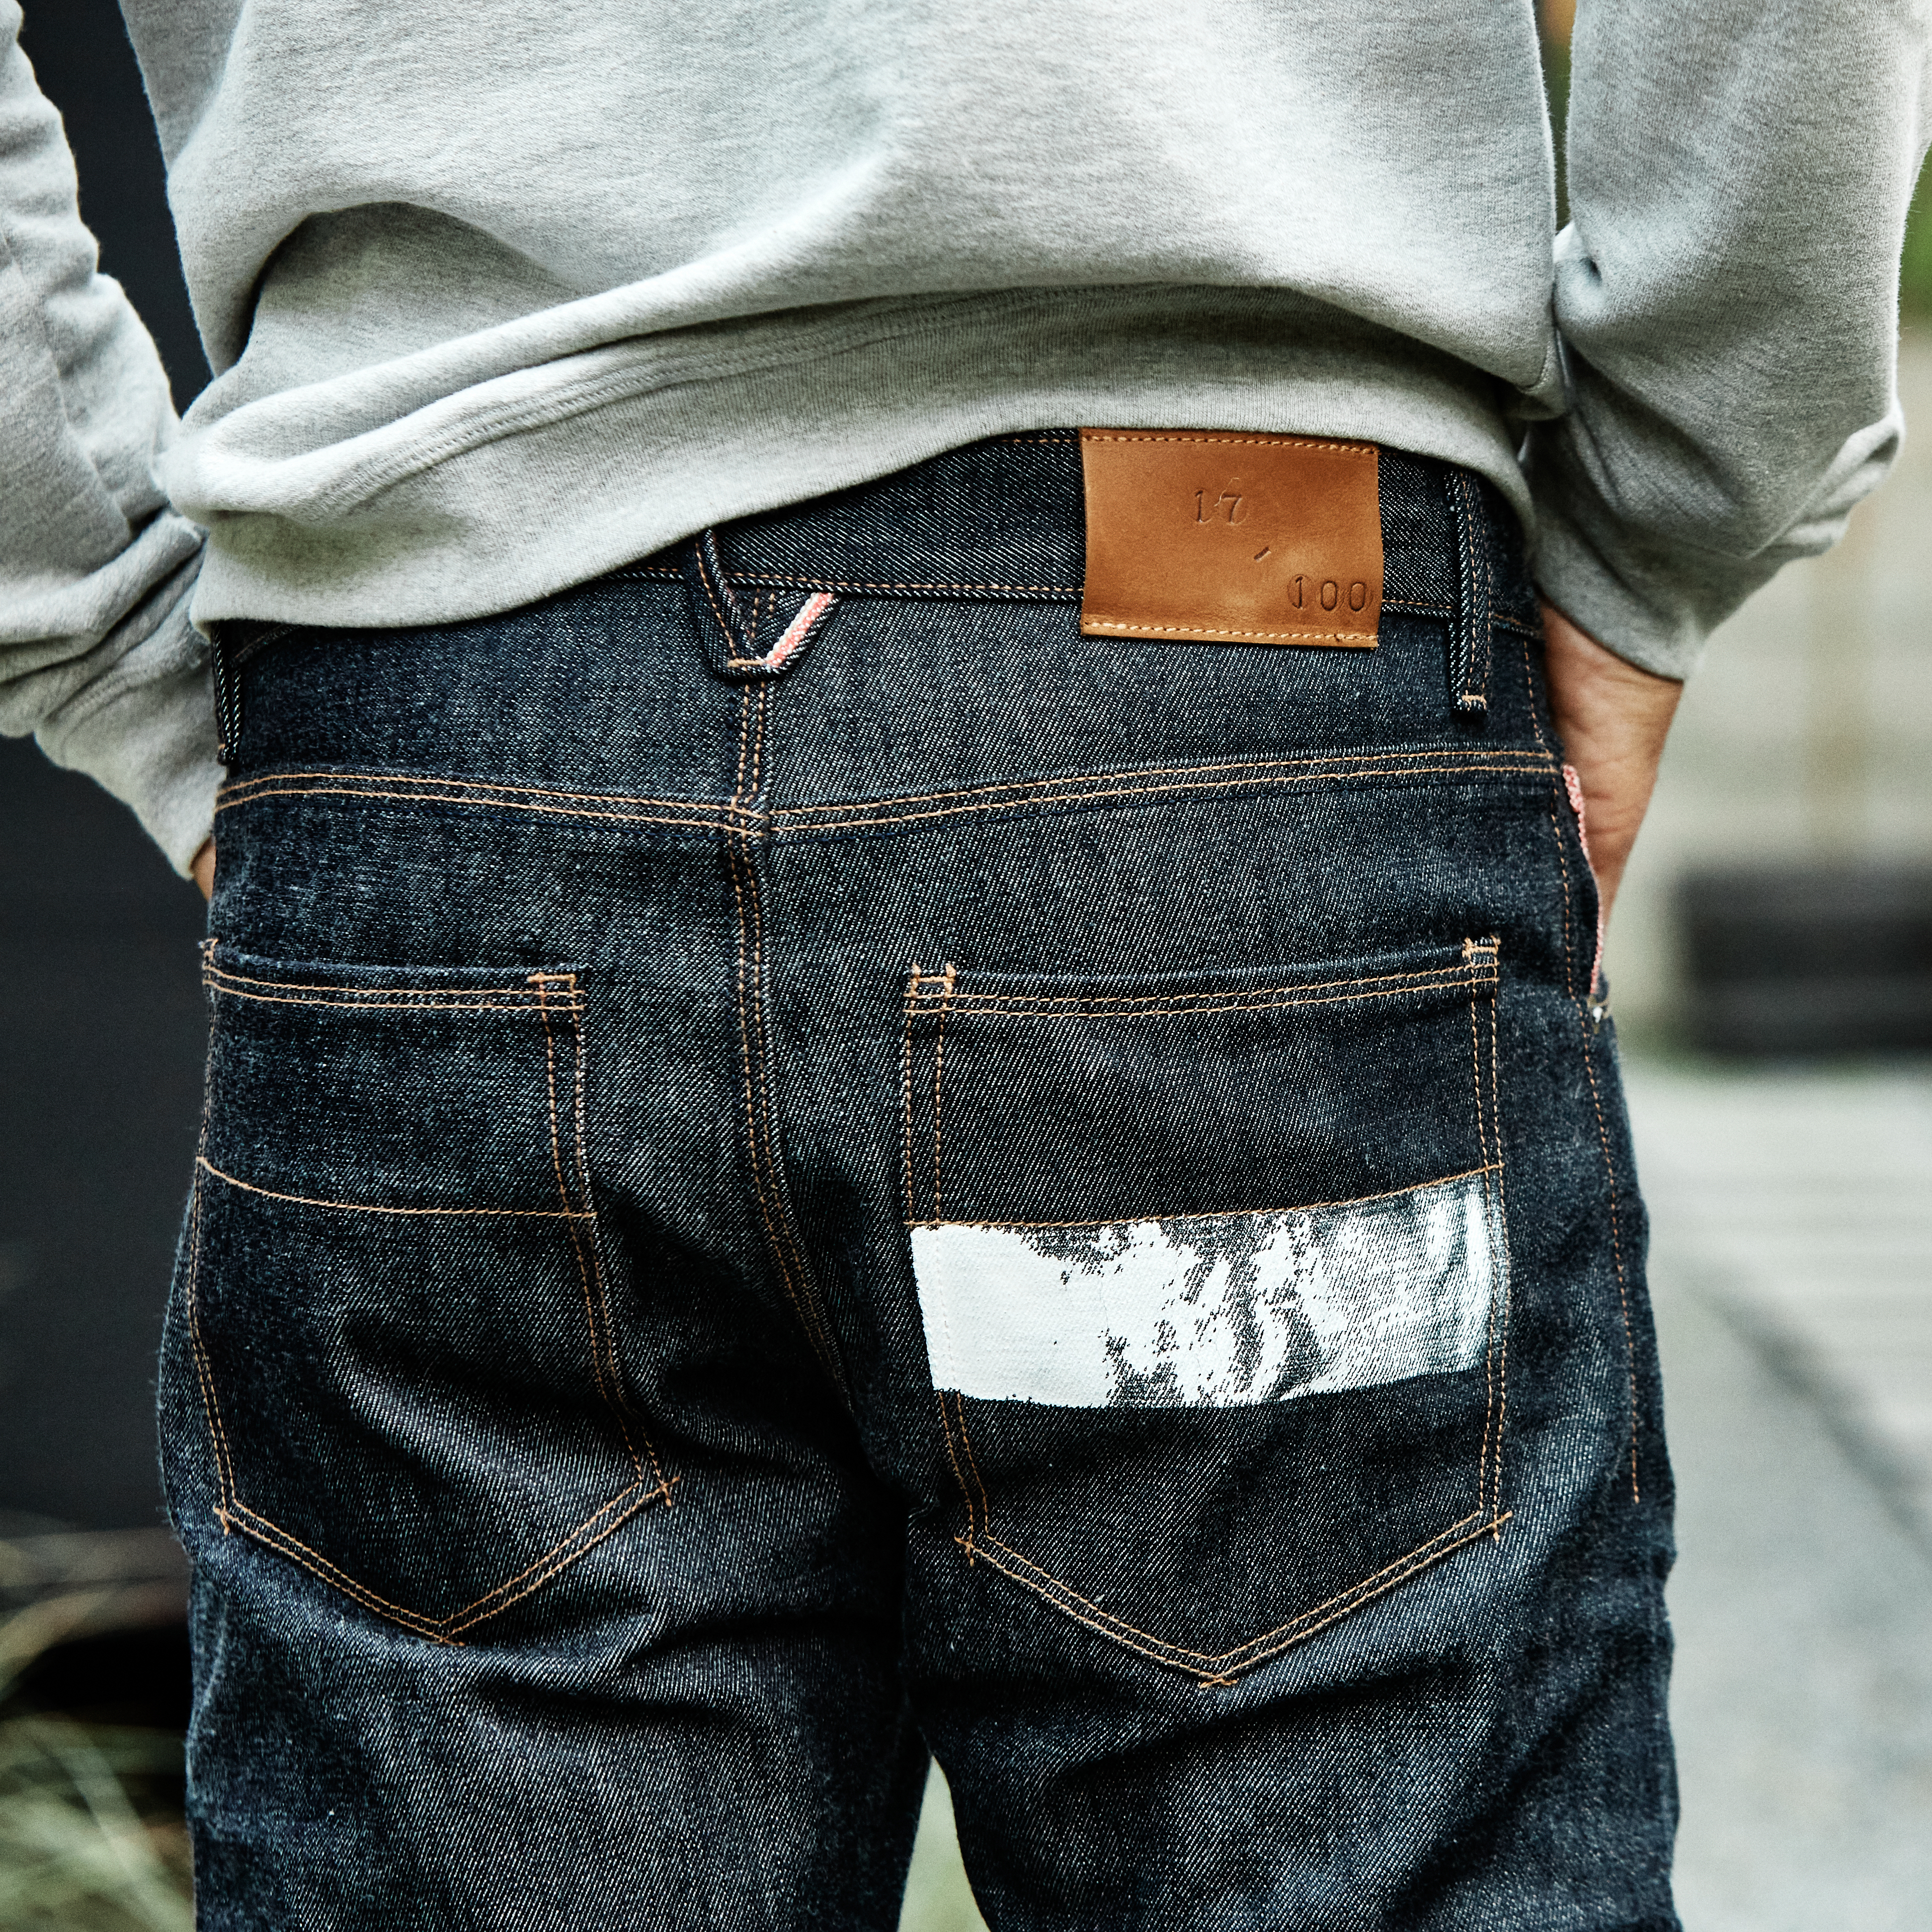 What Your Raw Denim Could Look Like After Years of Loyalty | GQ